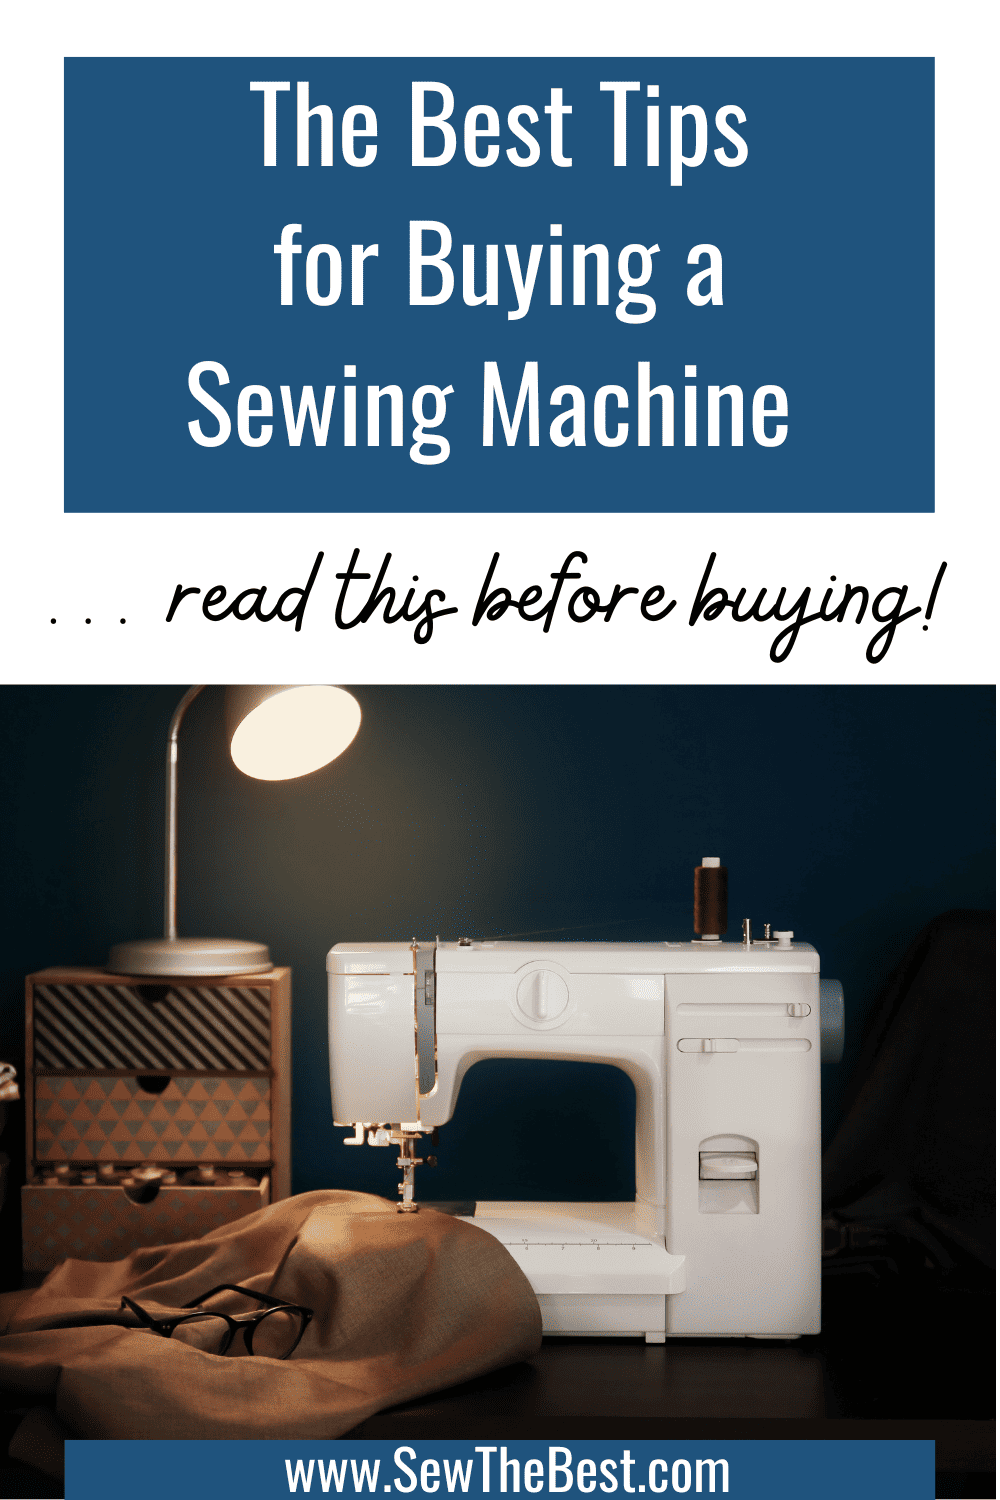 The Best Tips for Buying a Sewing Machine ... read this before buying!! Picture of a sewing machine with brown fabric and a lamp follows.